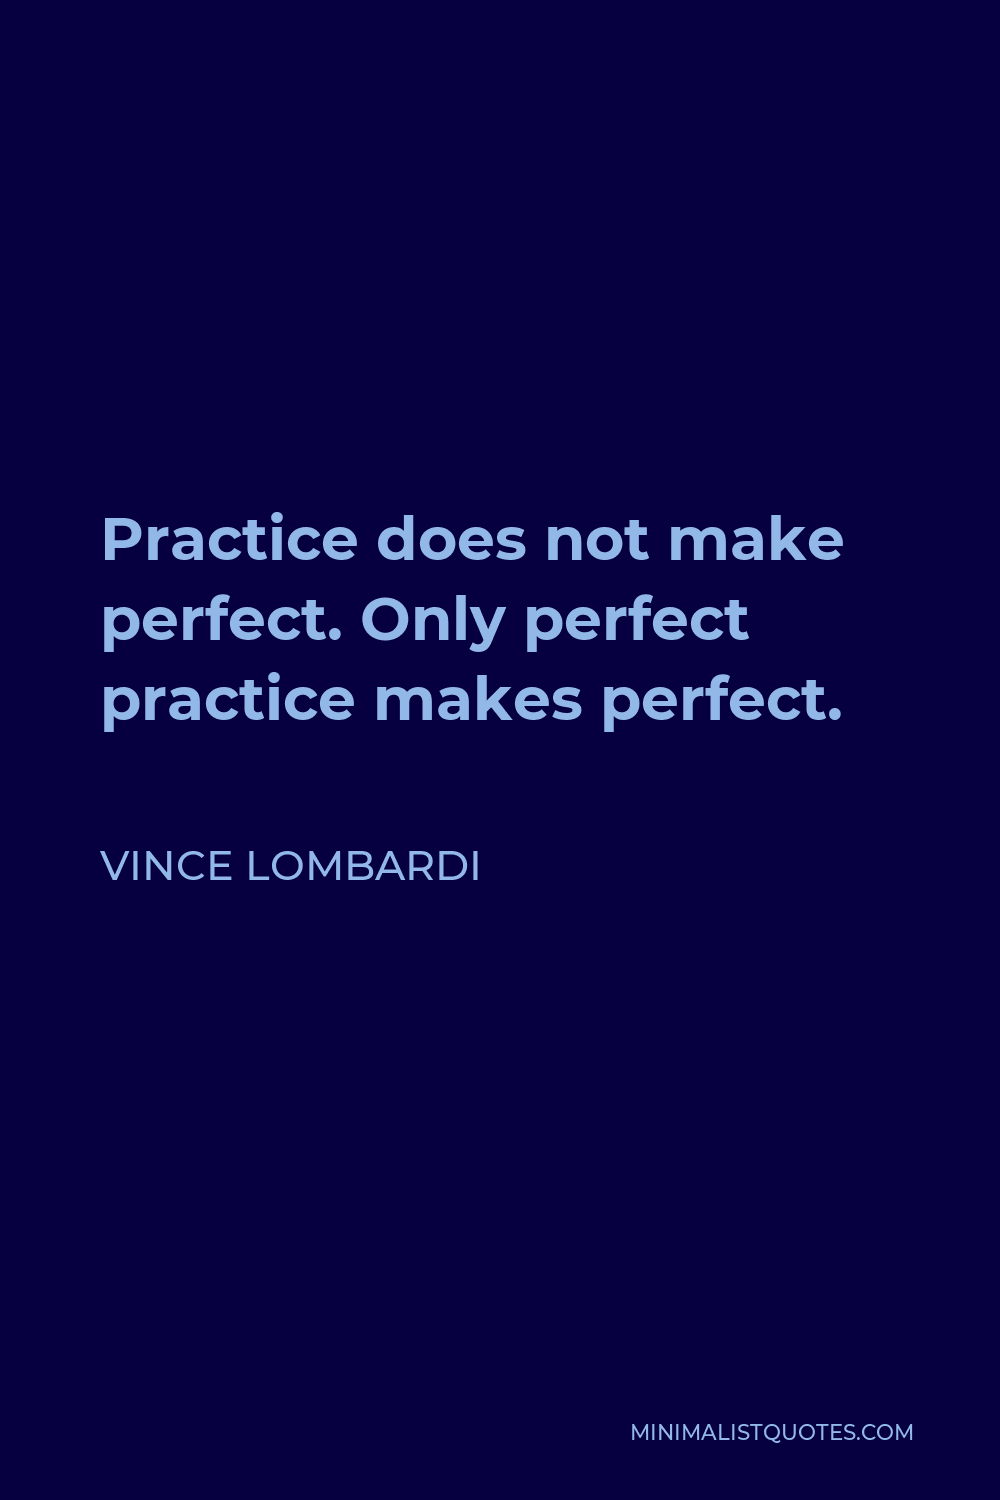 Vince Lombardi Quote - Practice does not make perfect. Only perfect practice makes perfect.